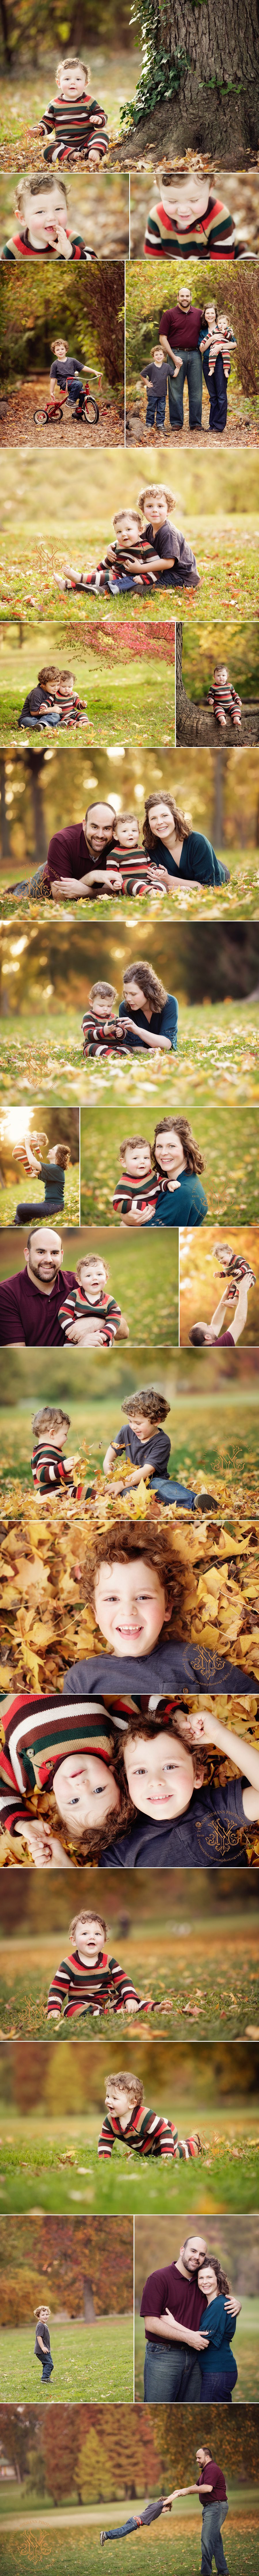 Fun Autumn Family Photos taken by Yvonne Niemann Photography at local park in St. Louis.